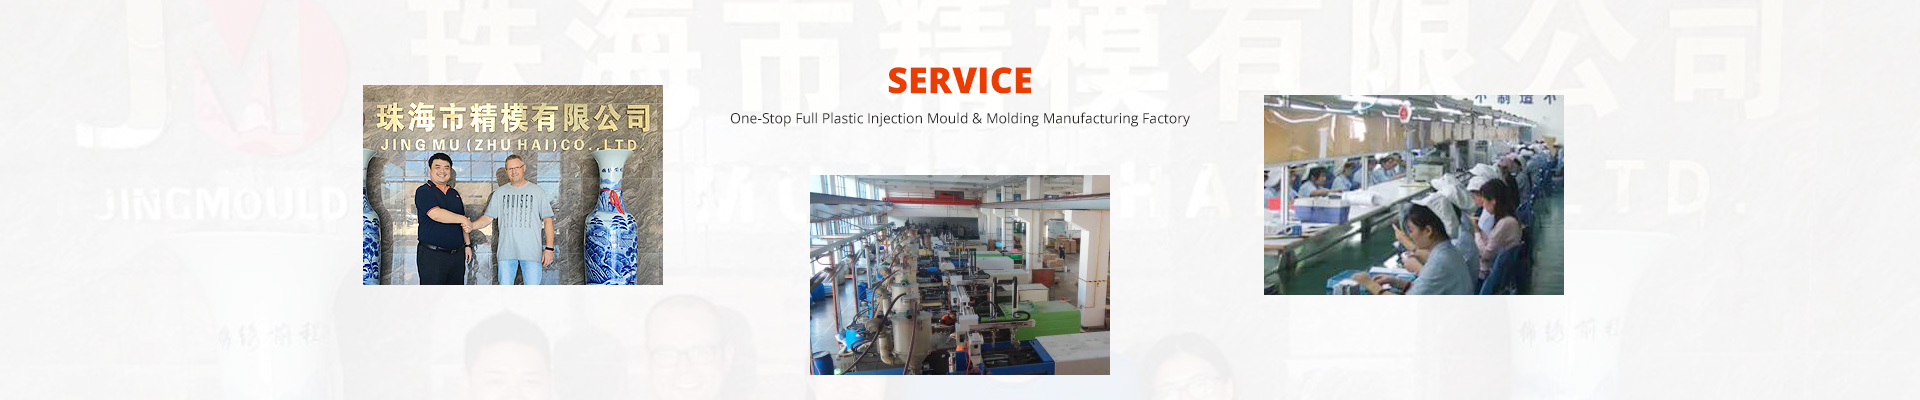 Manufacturing Assembly & Packaging Services